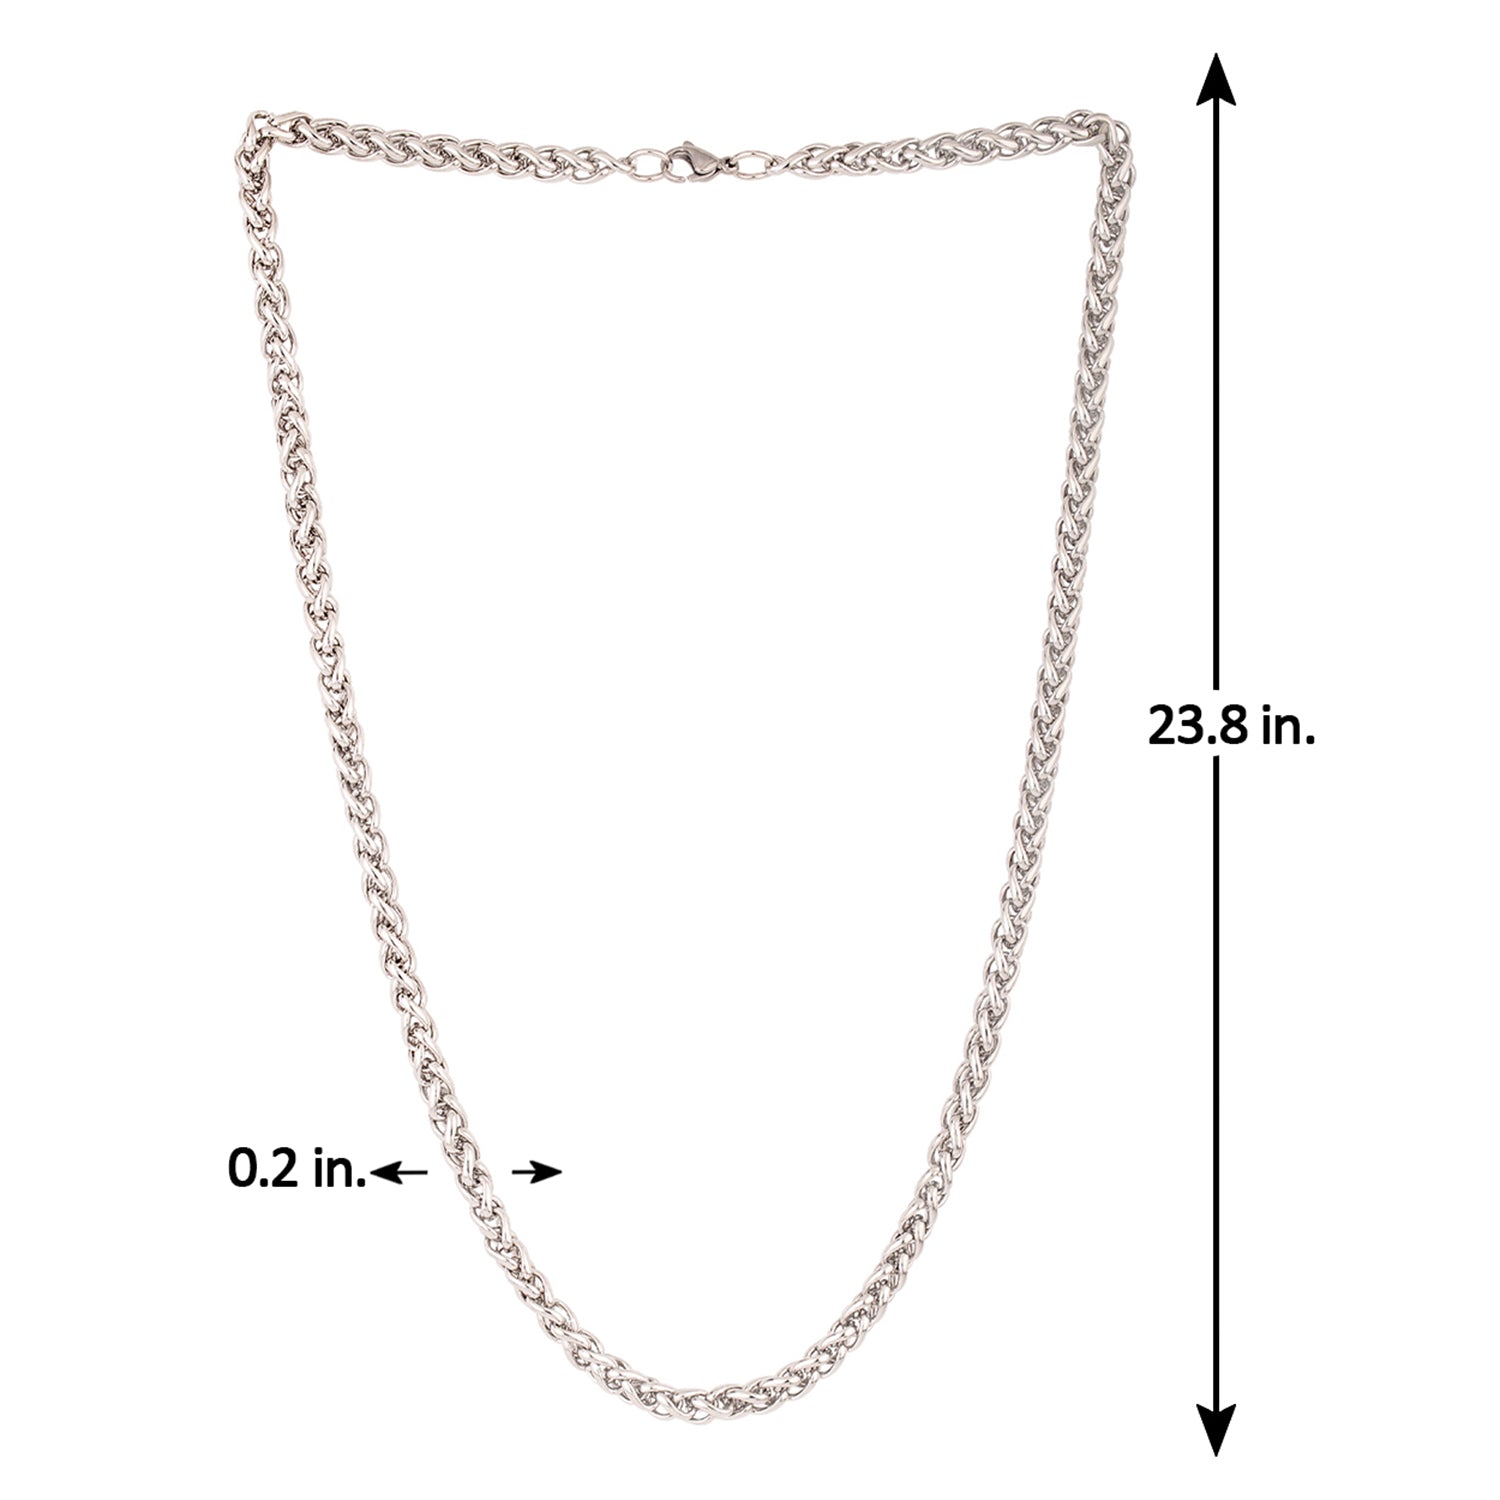 Royal Links Beaded Pattern Chain